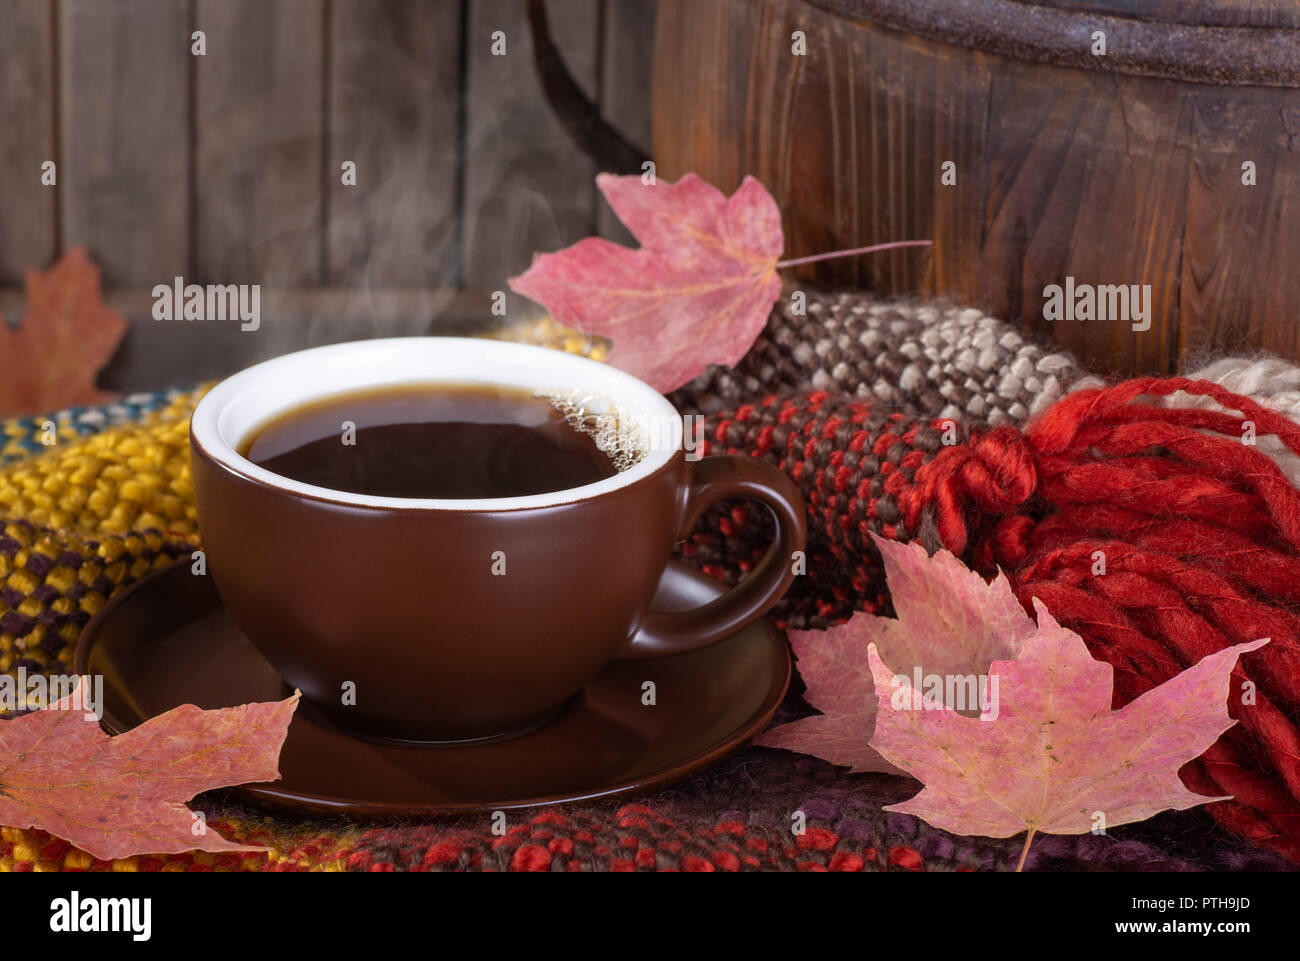 Steaming cup of coffee with autumn leaves on a colorful blanket Stock Photo